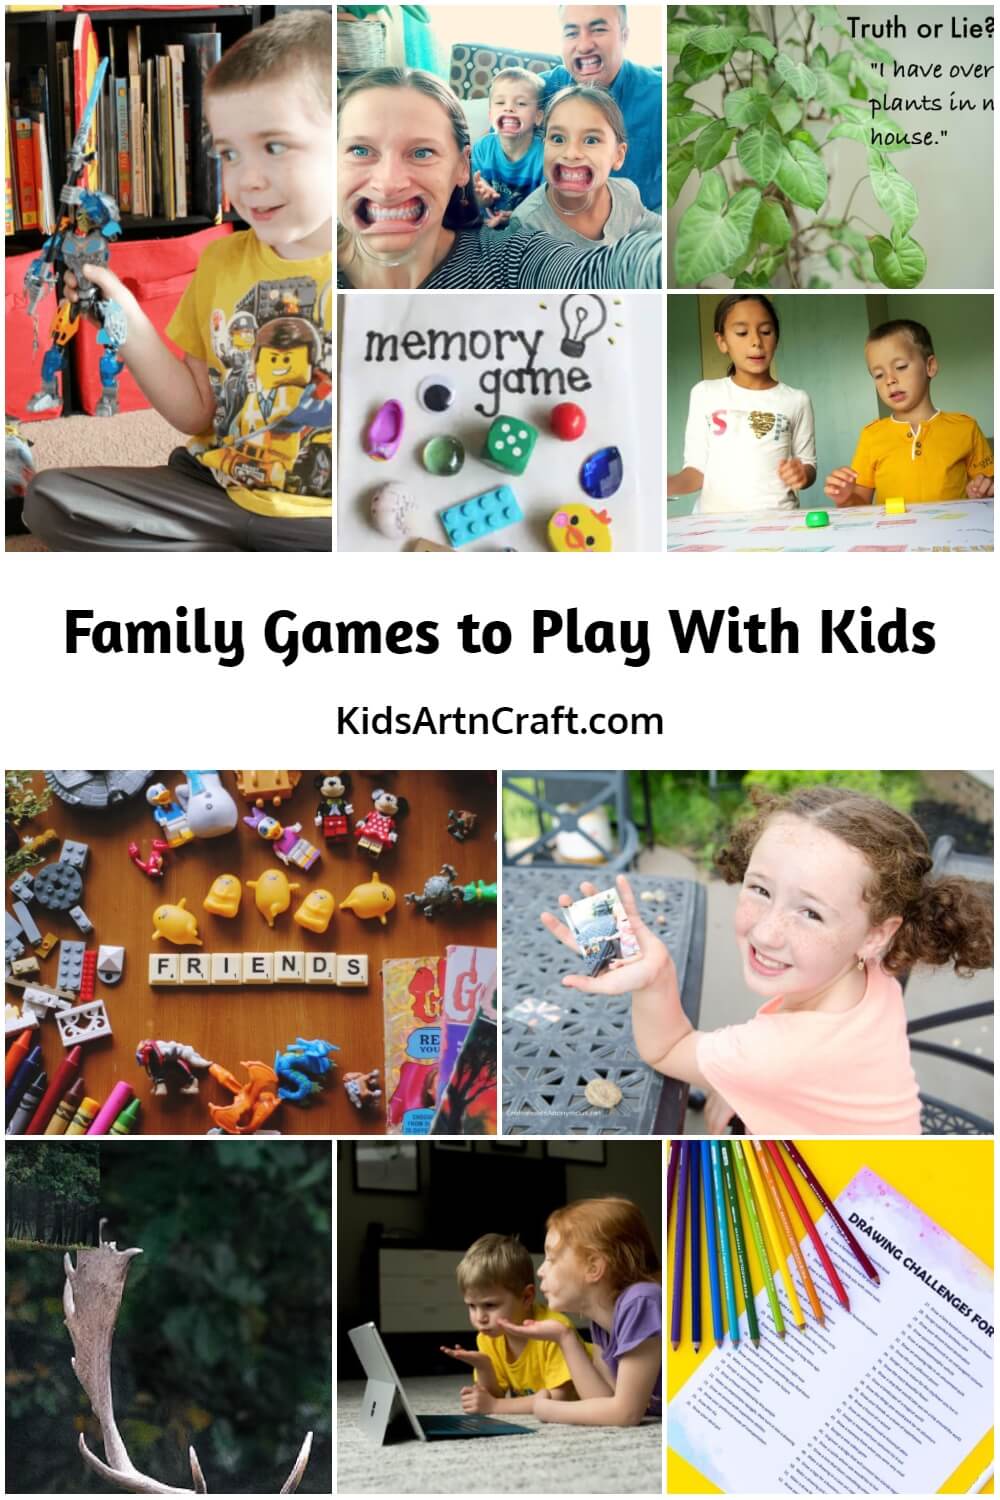 Family Games to Play With Kids